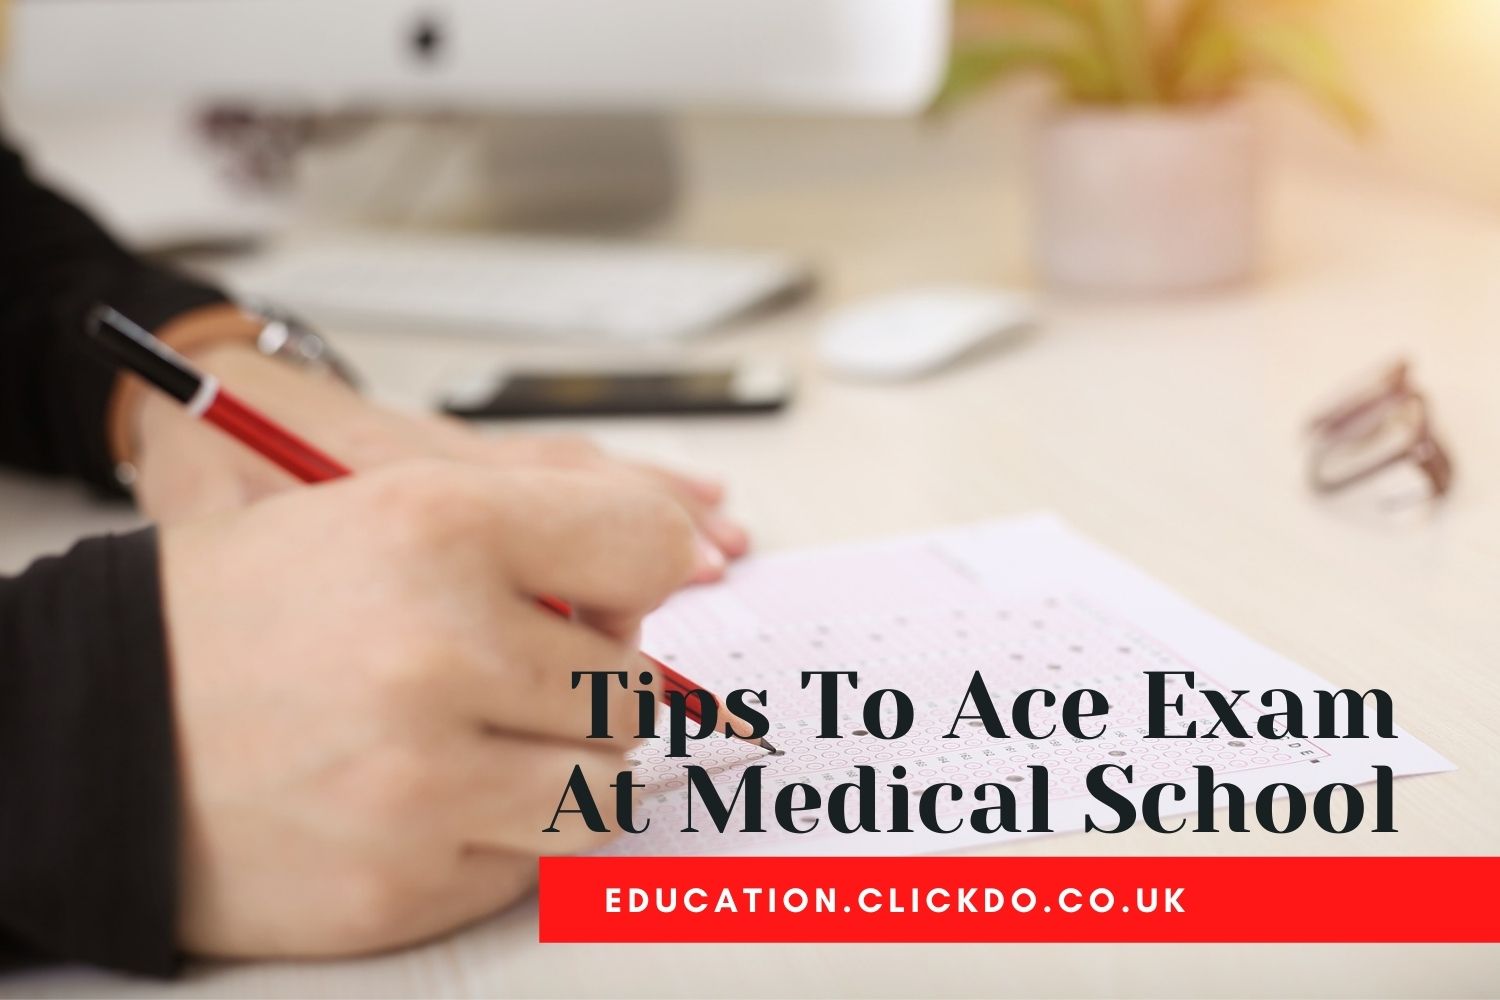 Tips-To-Ace-Exam-At-Medical-School